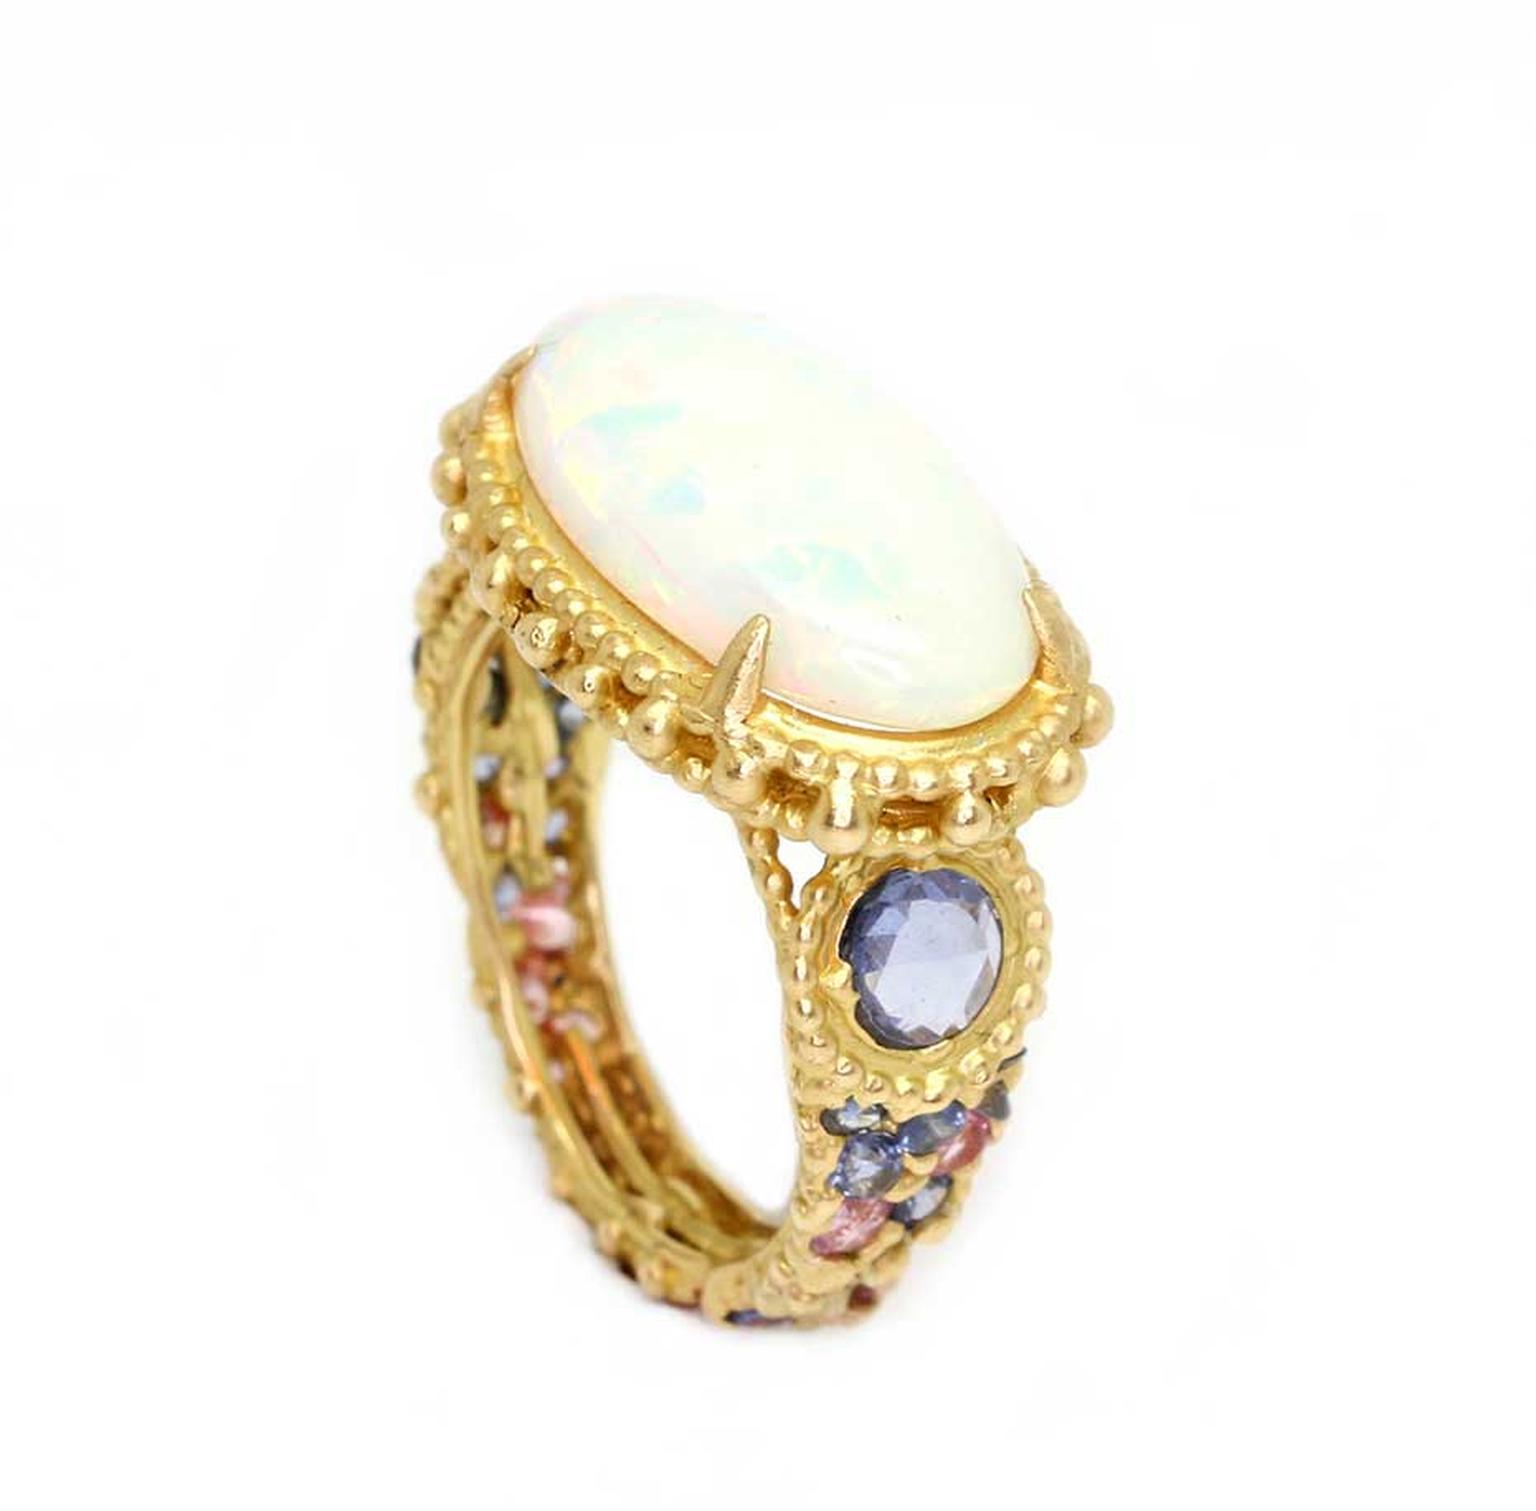 Polly Wales Ethiopian opal Rapunzel ring with sapphires in shades of lavender and pink (£POA).